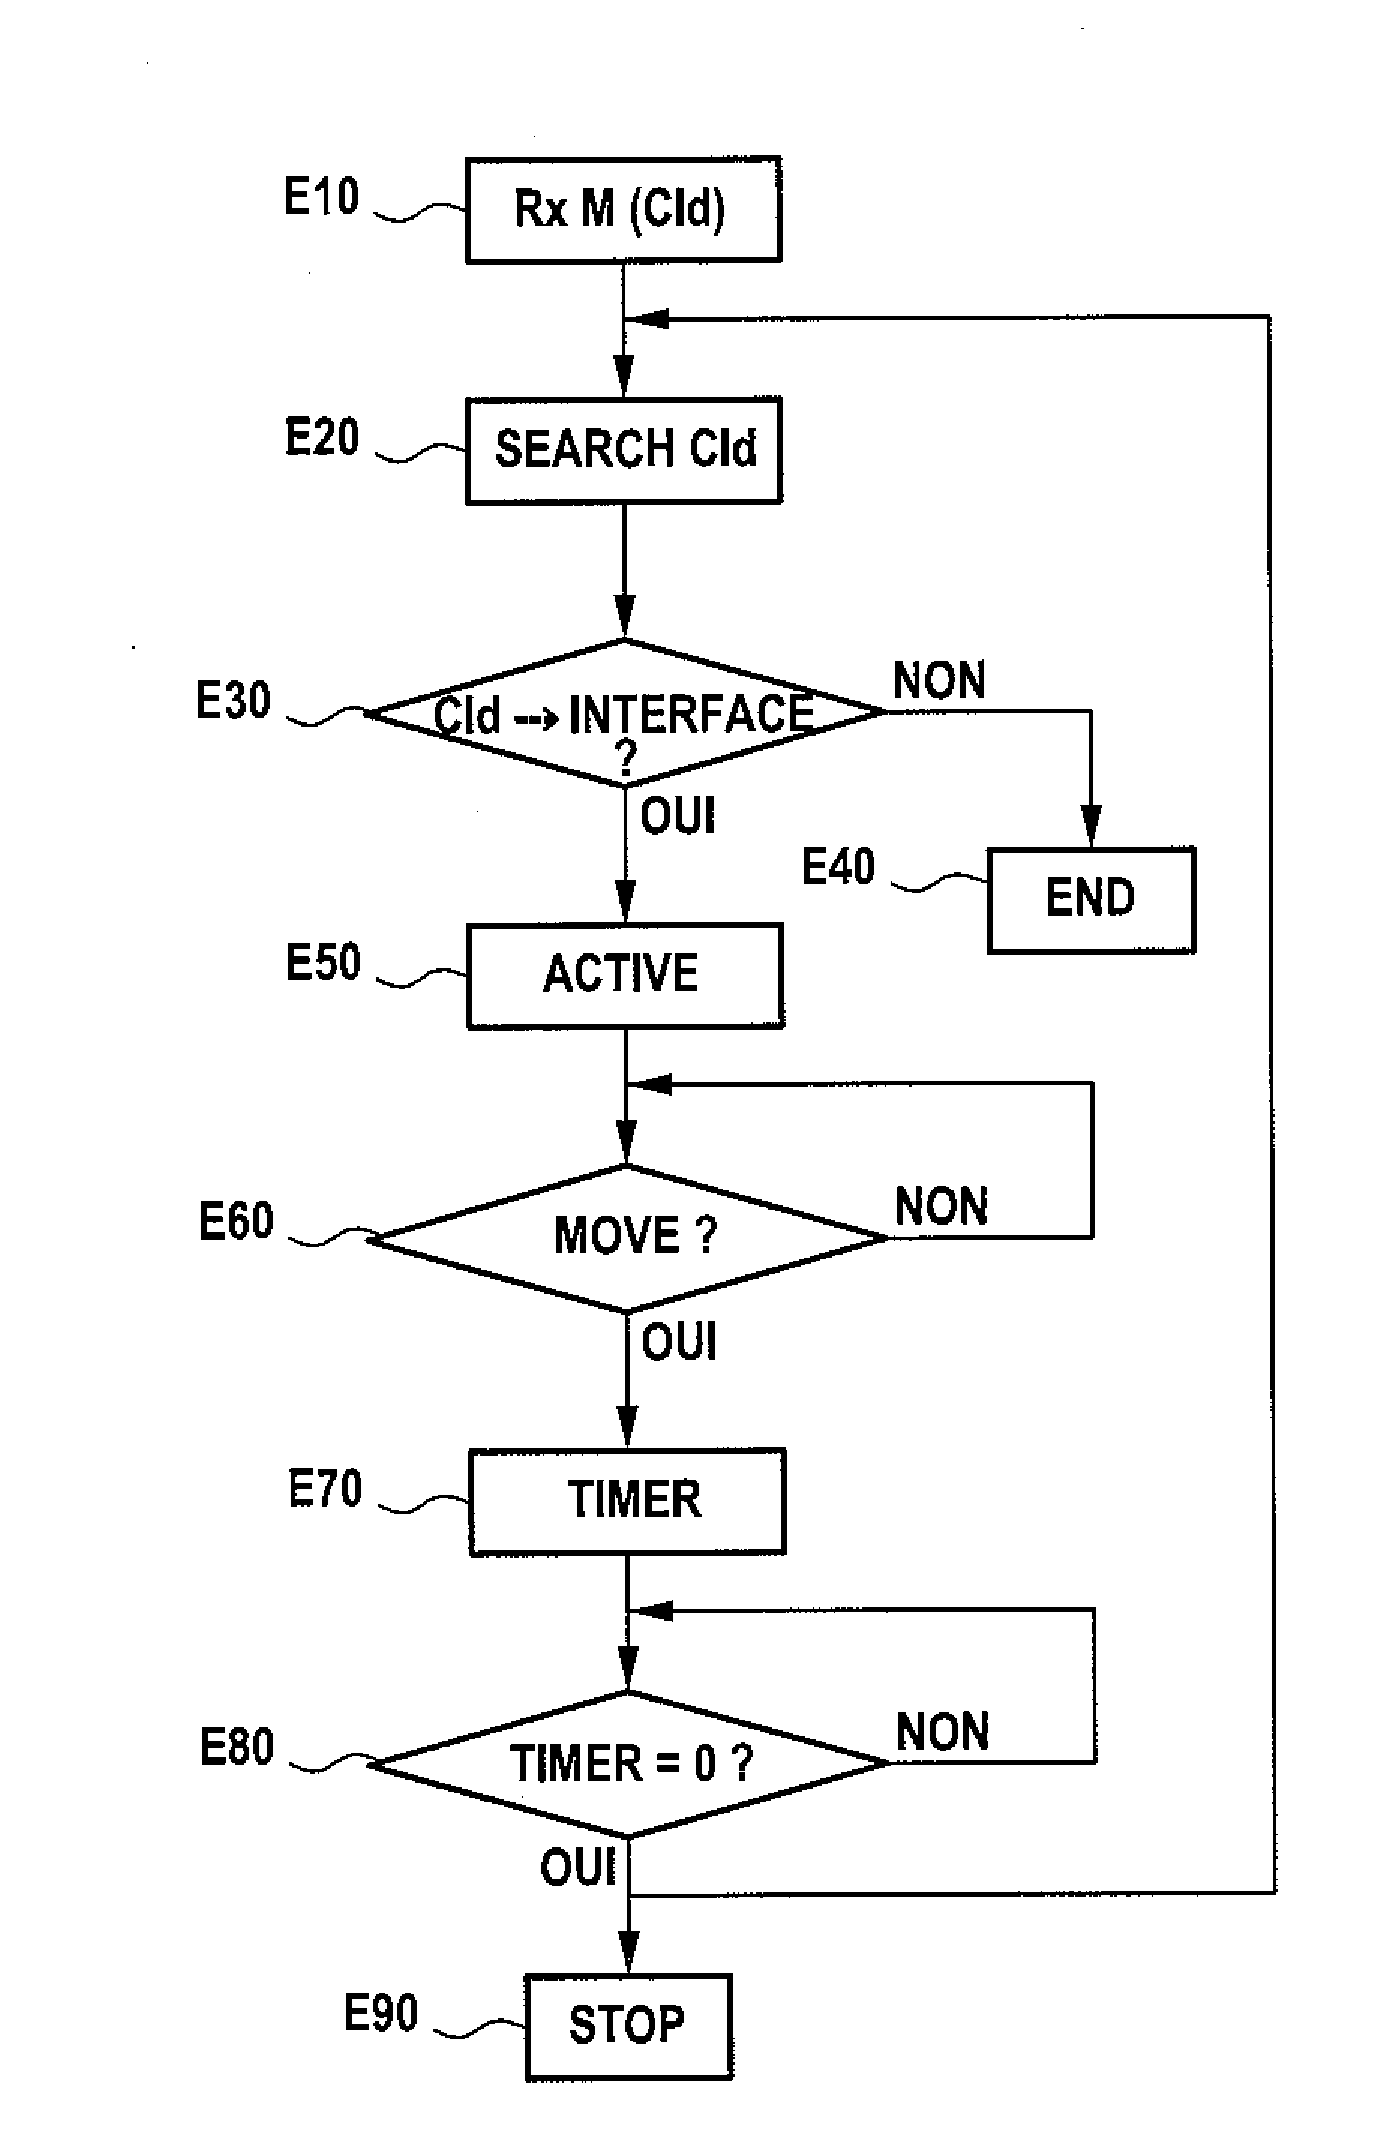 Management of a Wireless Communication Interface of a Terminal